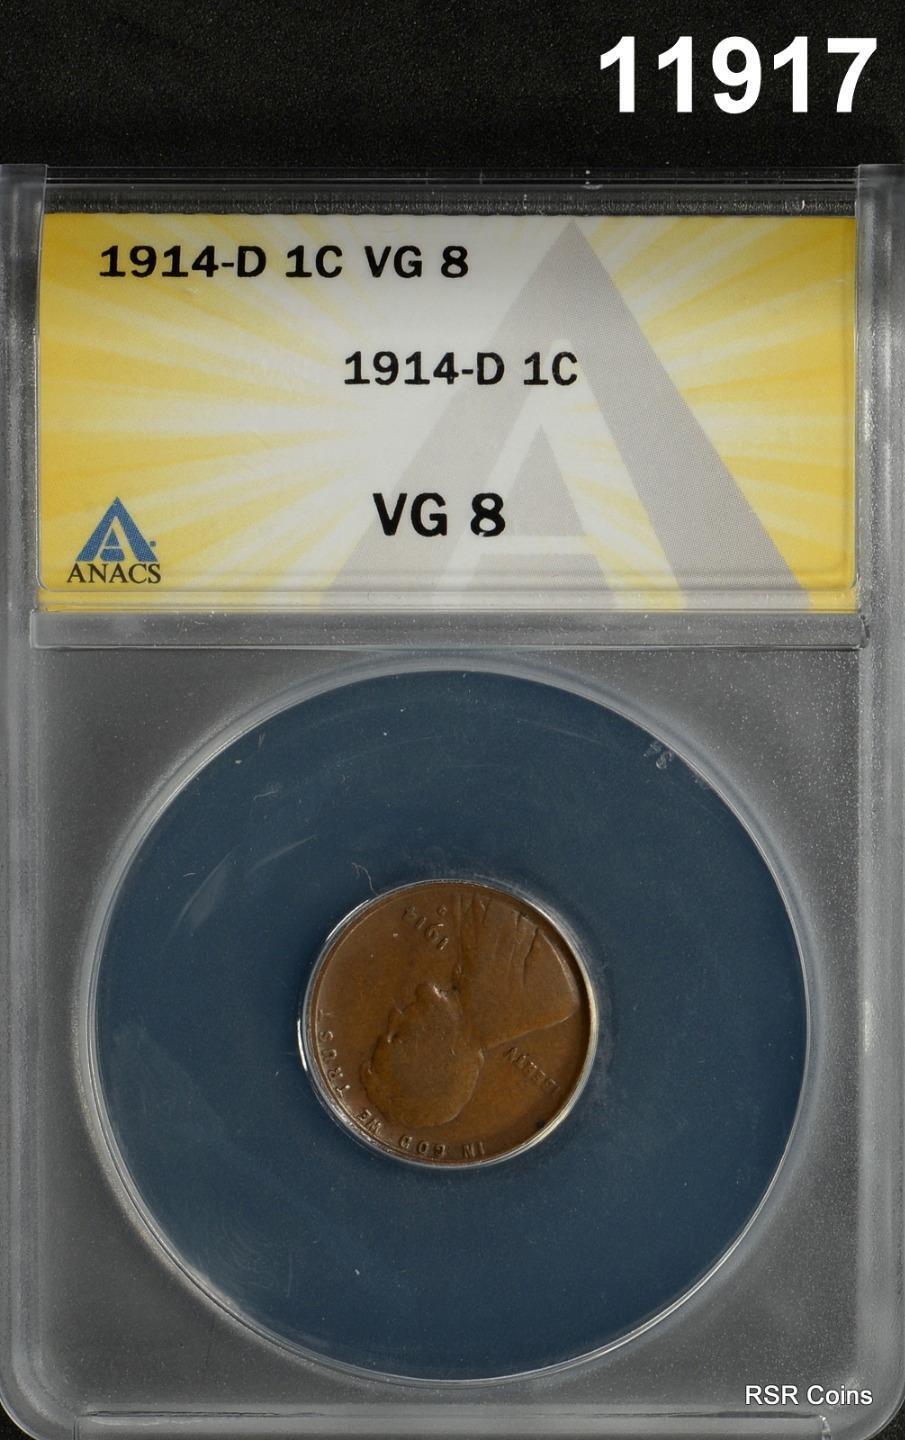 1914 D LINCOLN CENT KEY DATE!! ANACS CERTIFIED VG 8 #11917